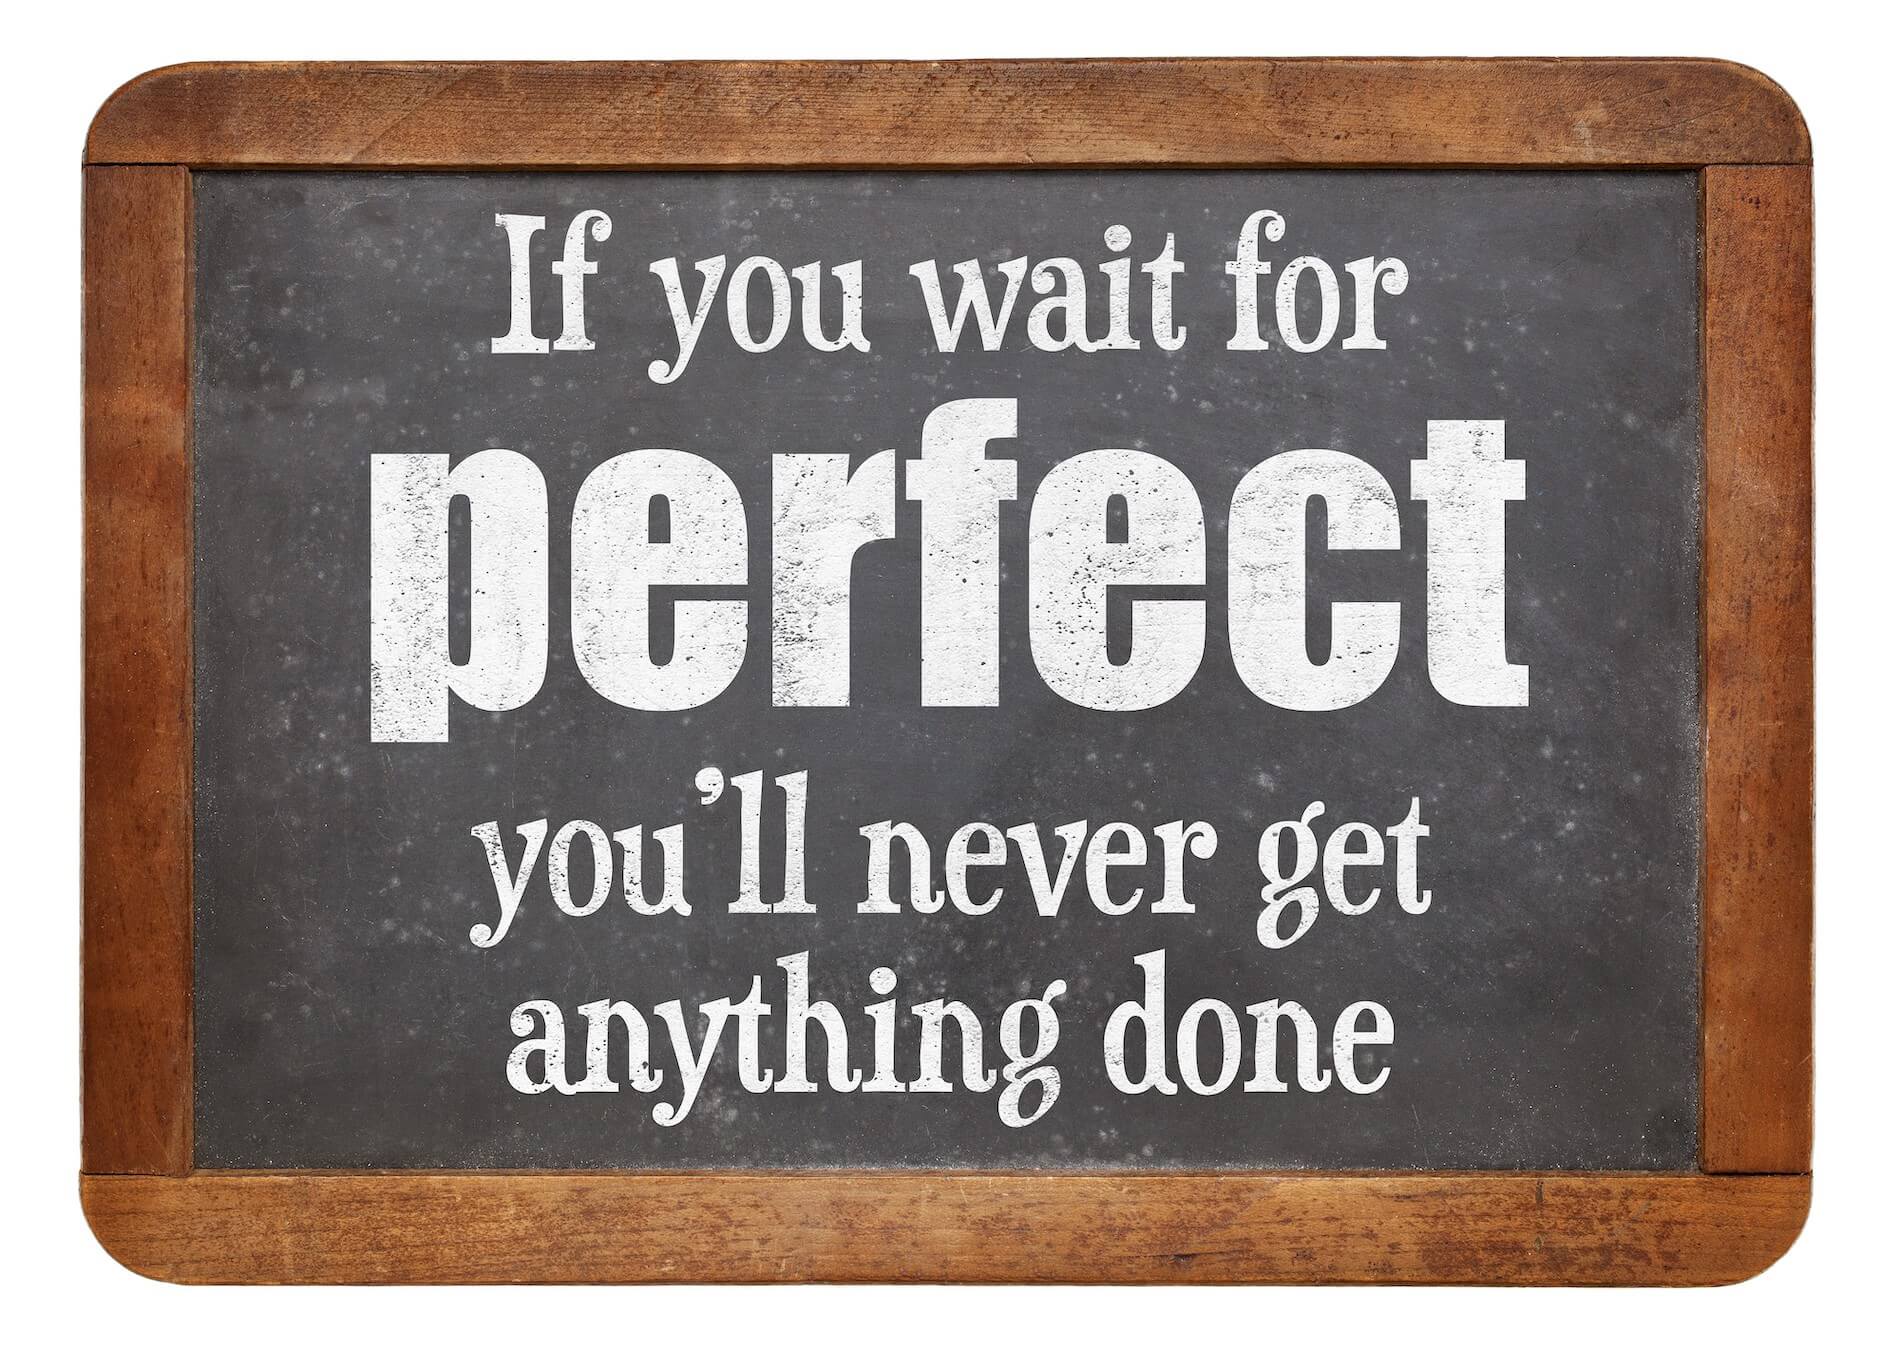 Blackboard with wooden rim with “If you wait for perfect, you’ll never get anything done” written in white chalk